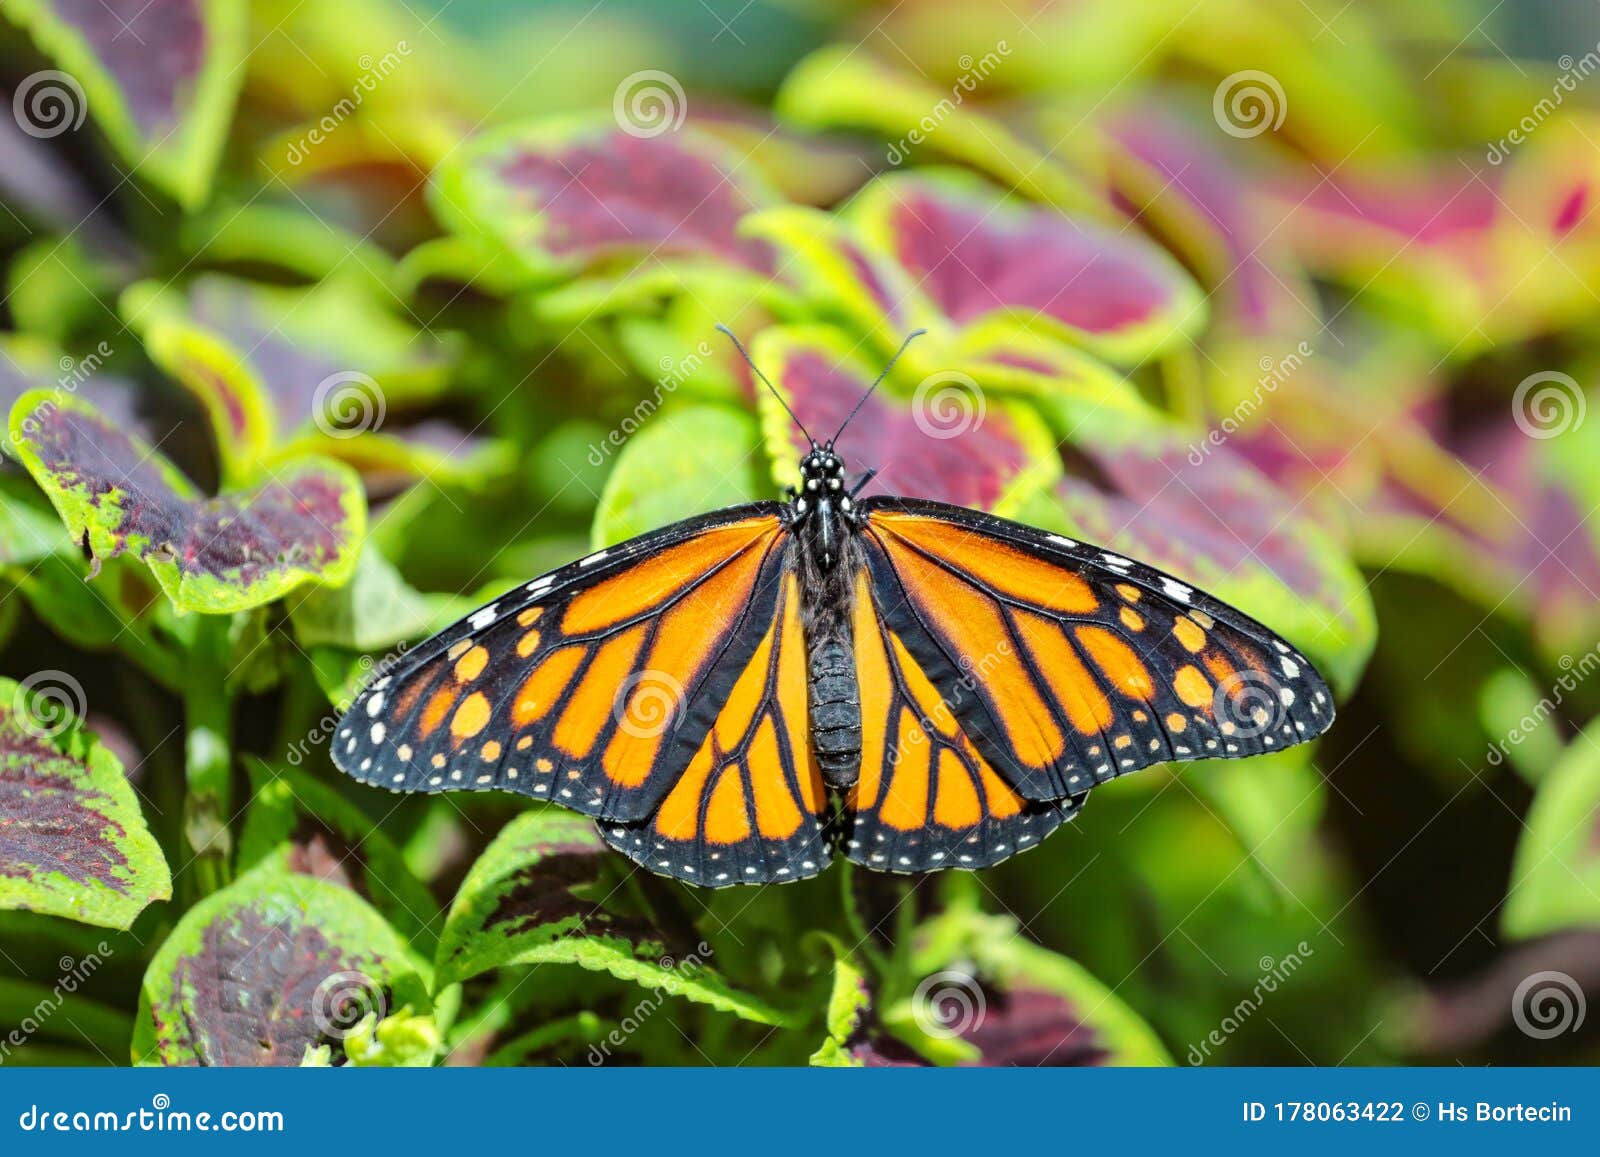 Tropical Butterfly Garden Opened in 20 Located in Selcuklu ...